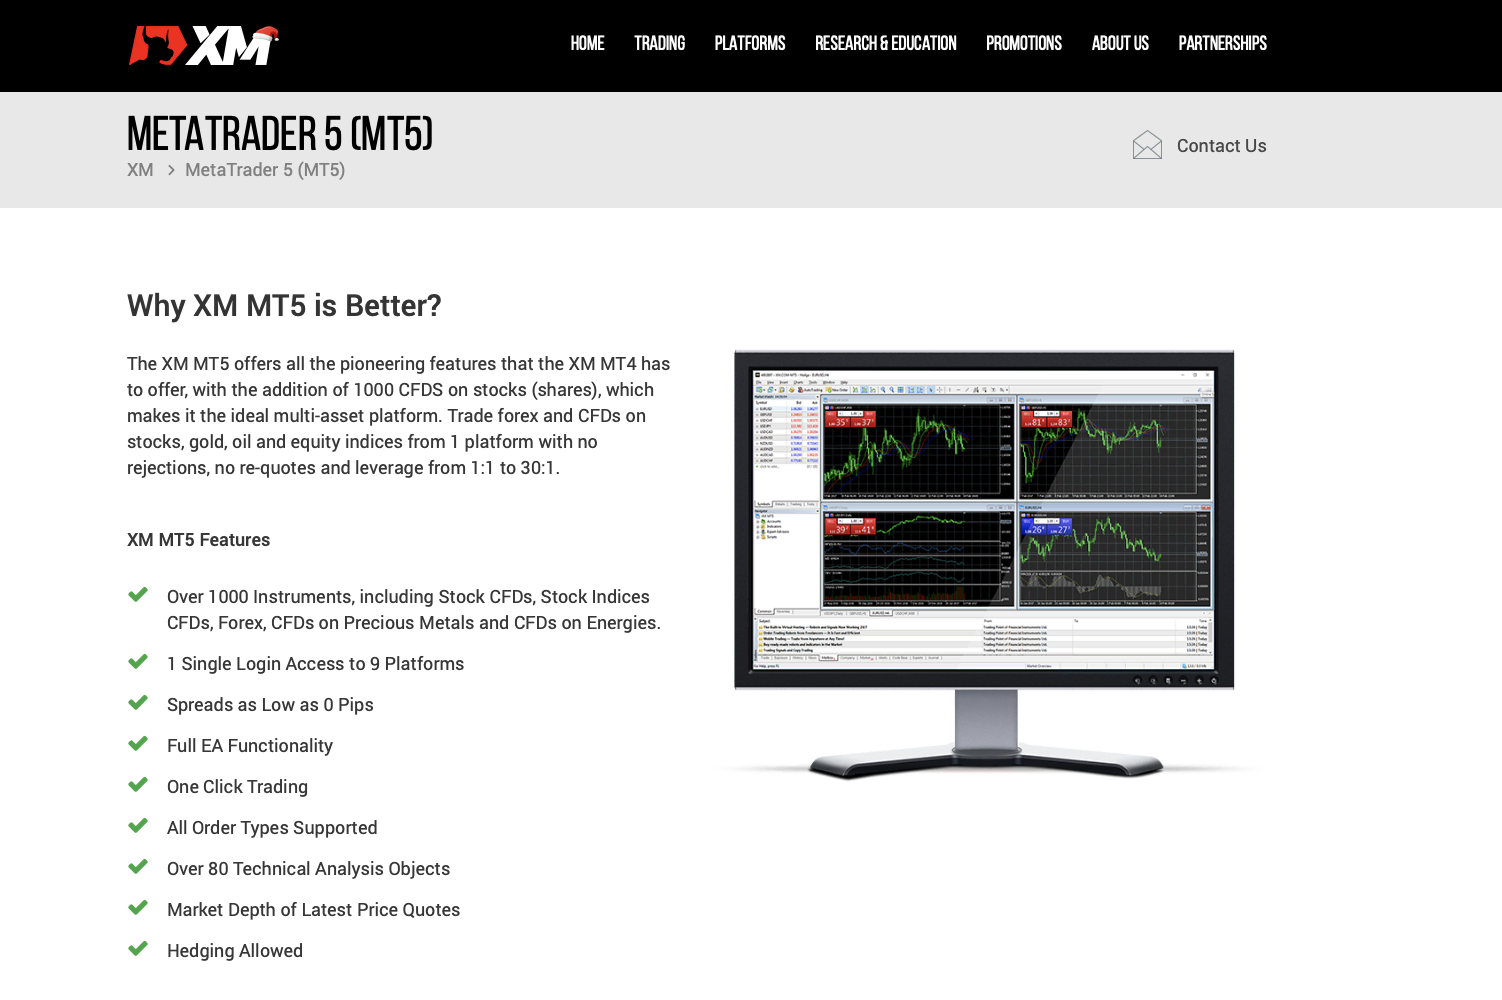 The official landingpage of the XM Metatrader 5